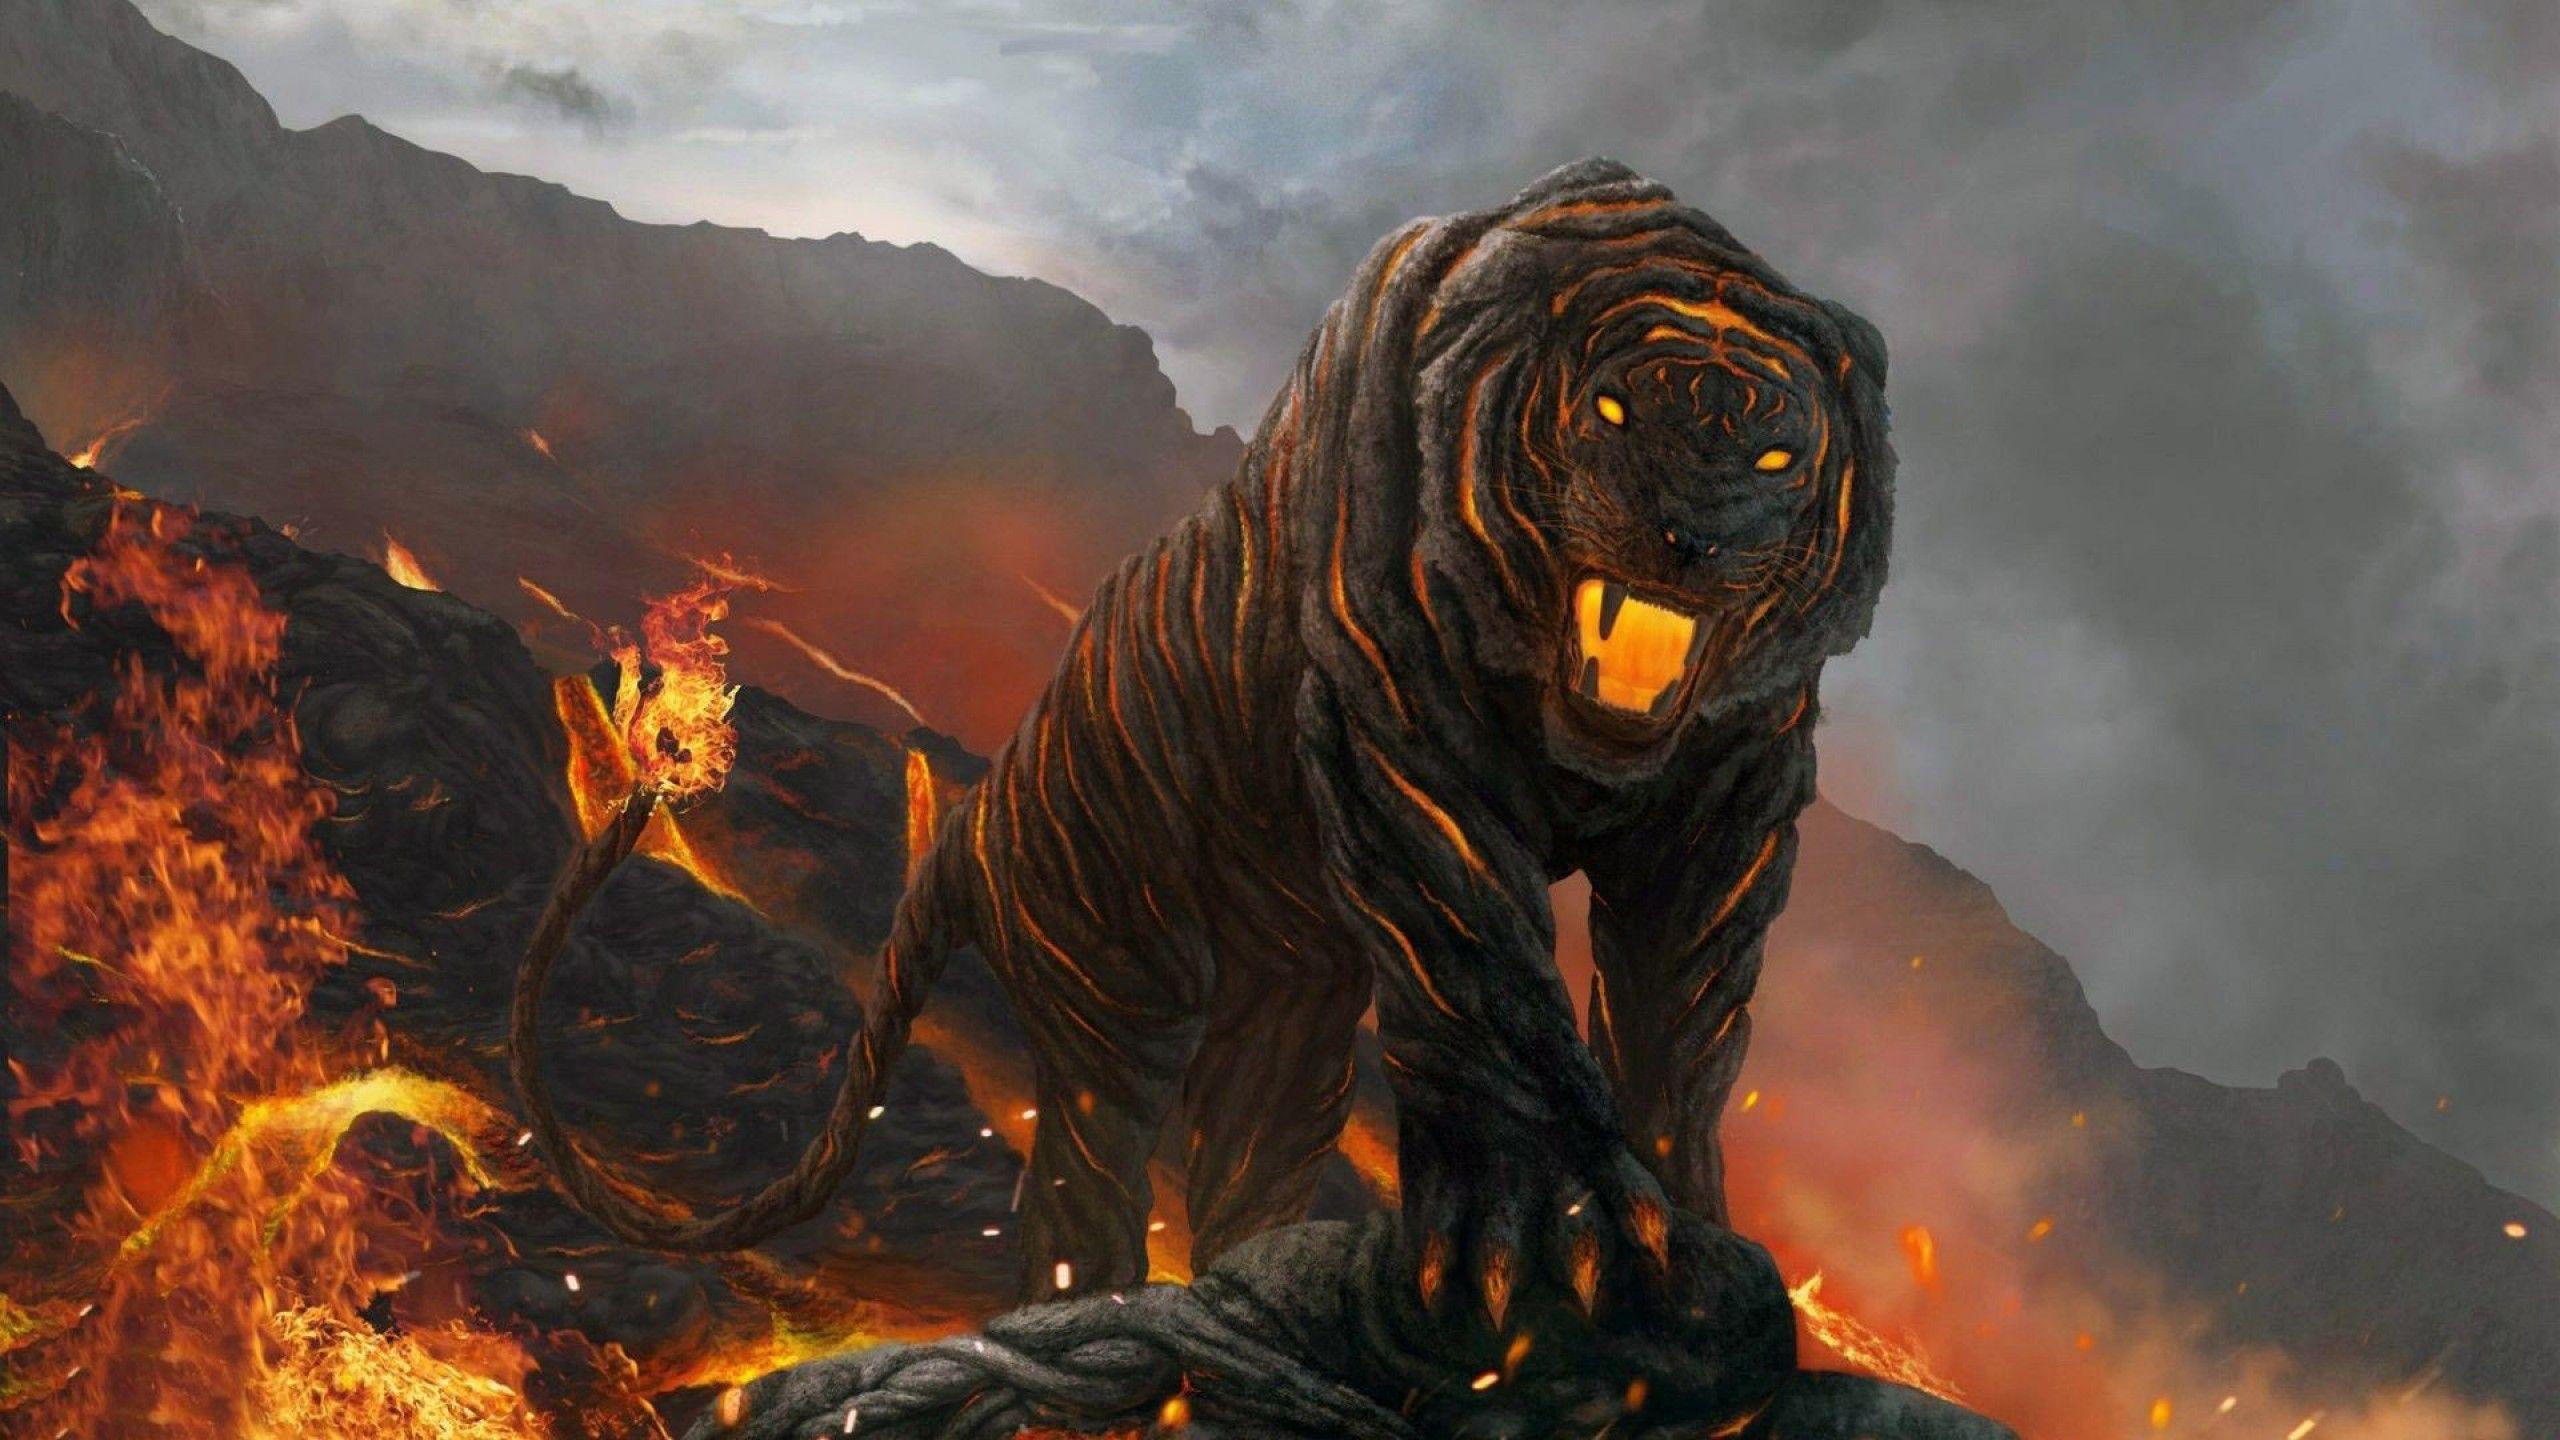 lava tiger 2560x1440 Wallpaper with HD resolution